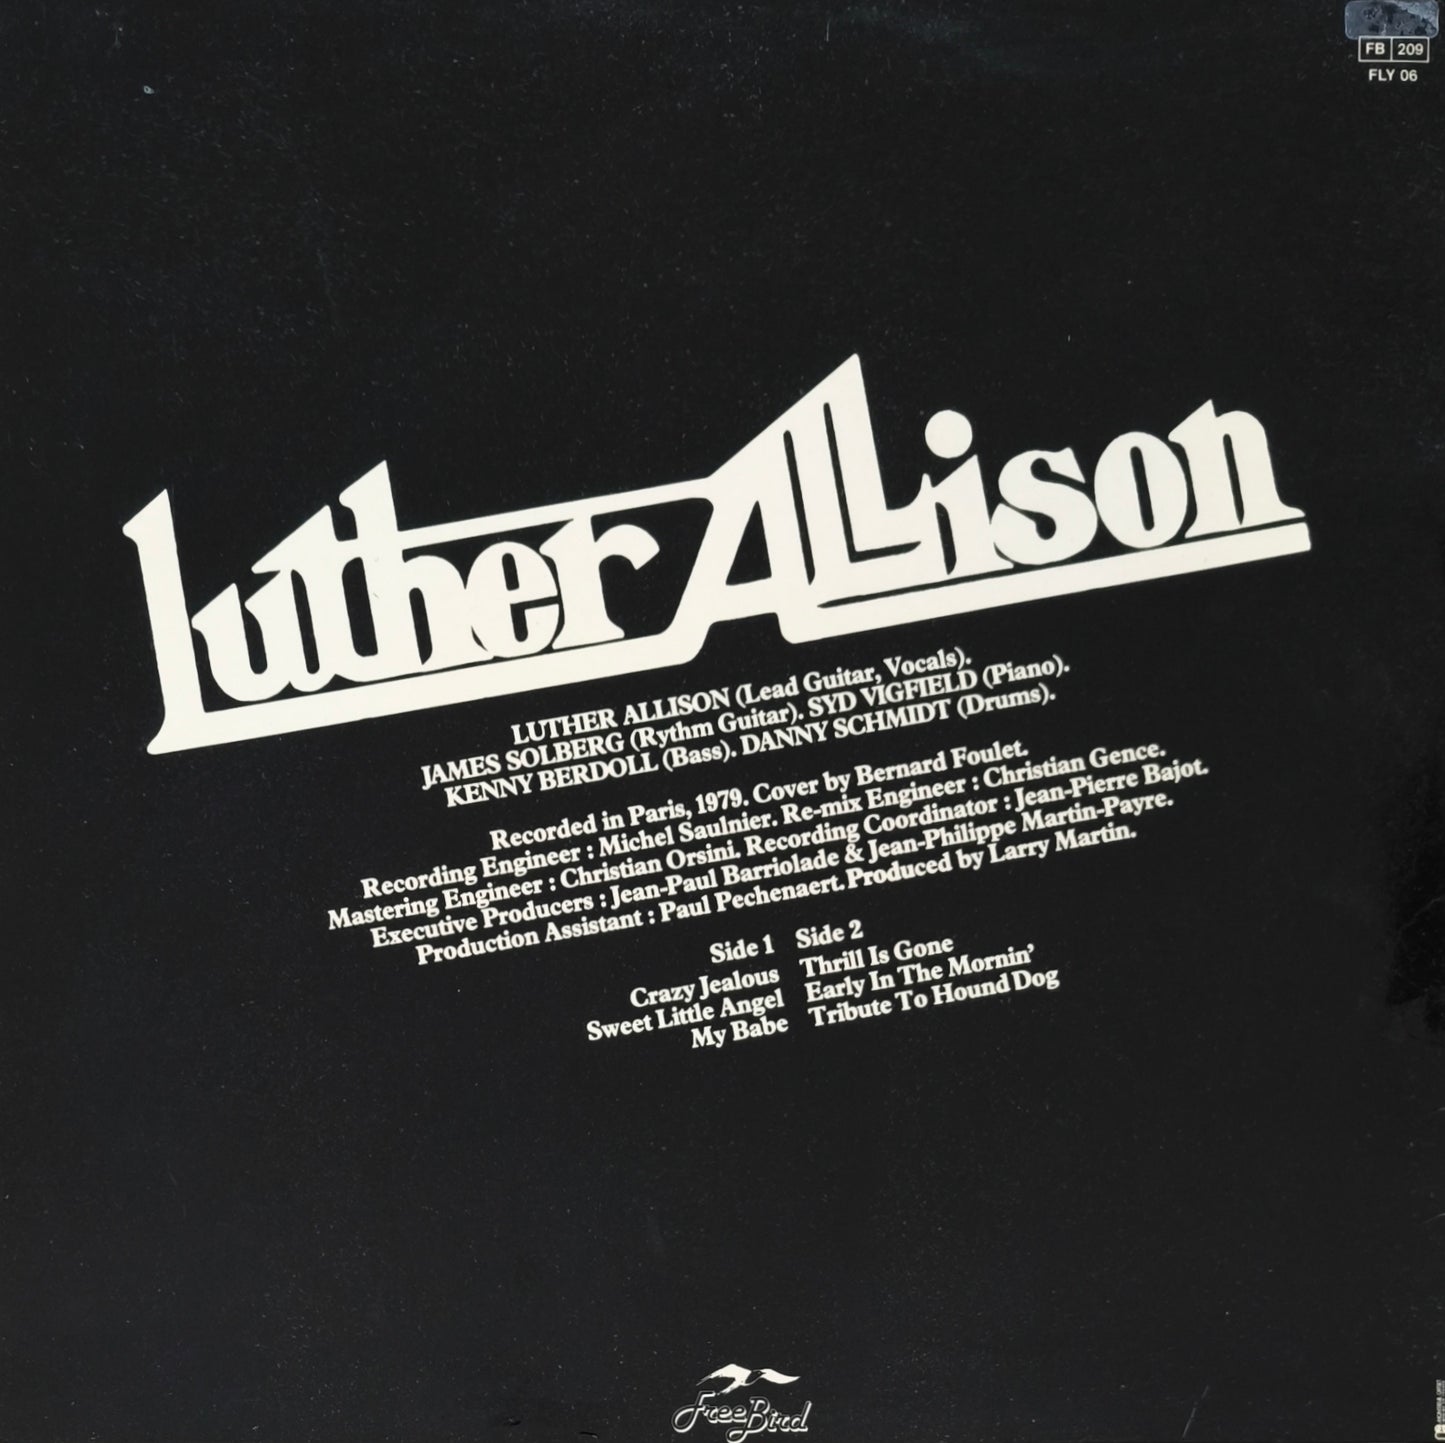 LUTHER ALLISON - Live In Paris